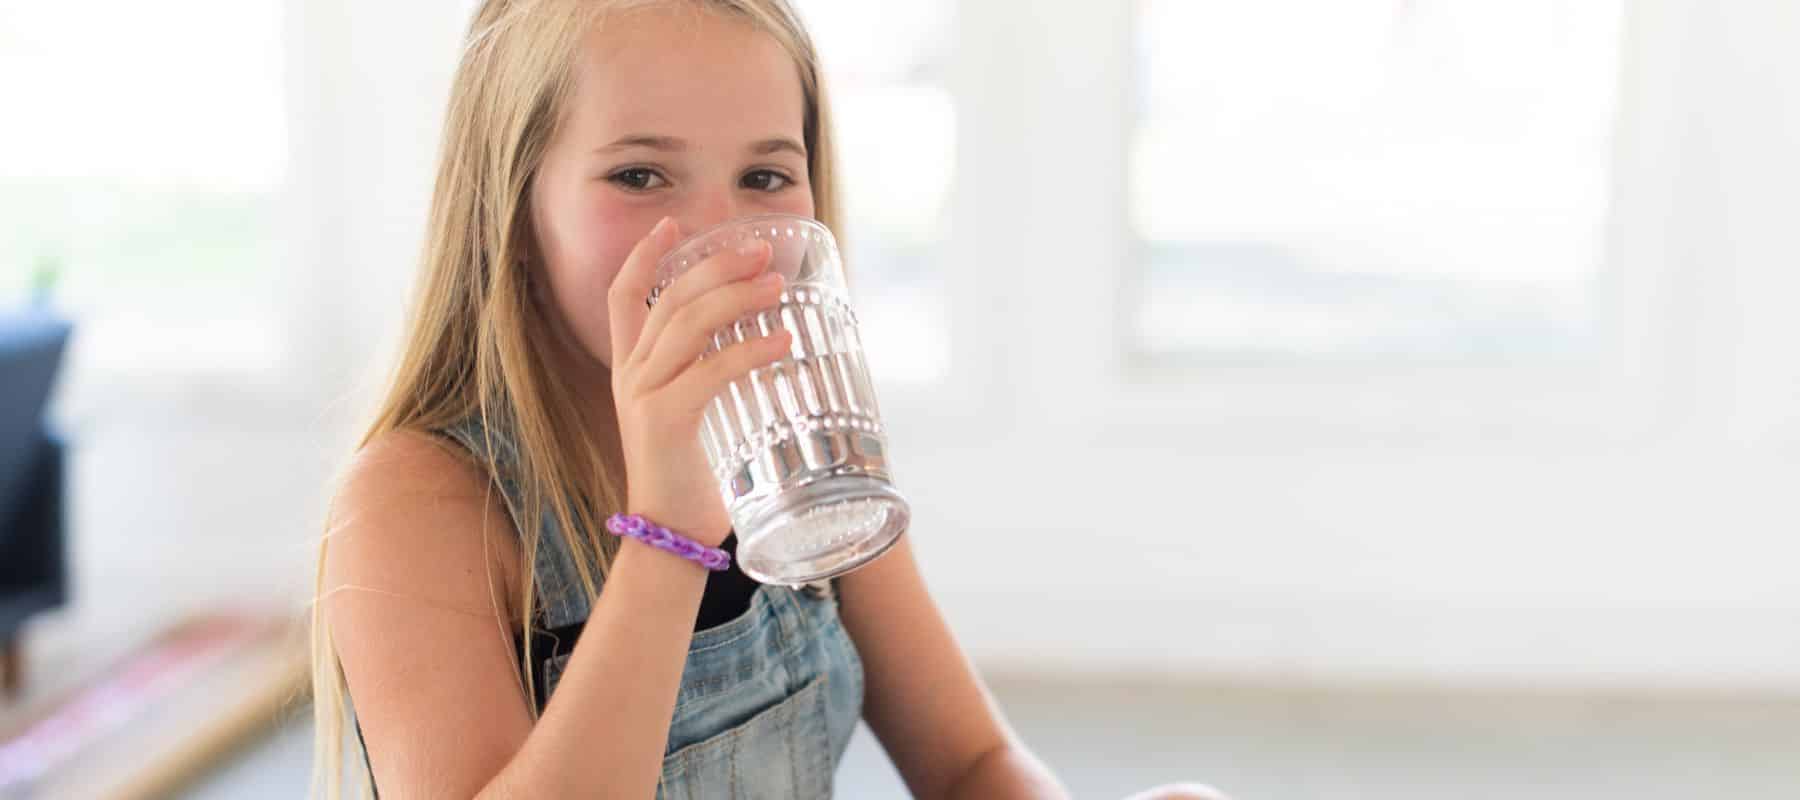 child drinking water out of a glass